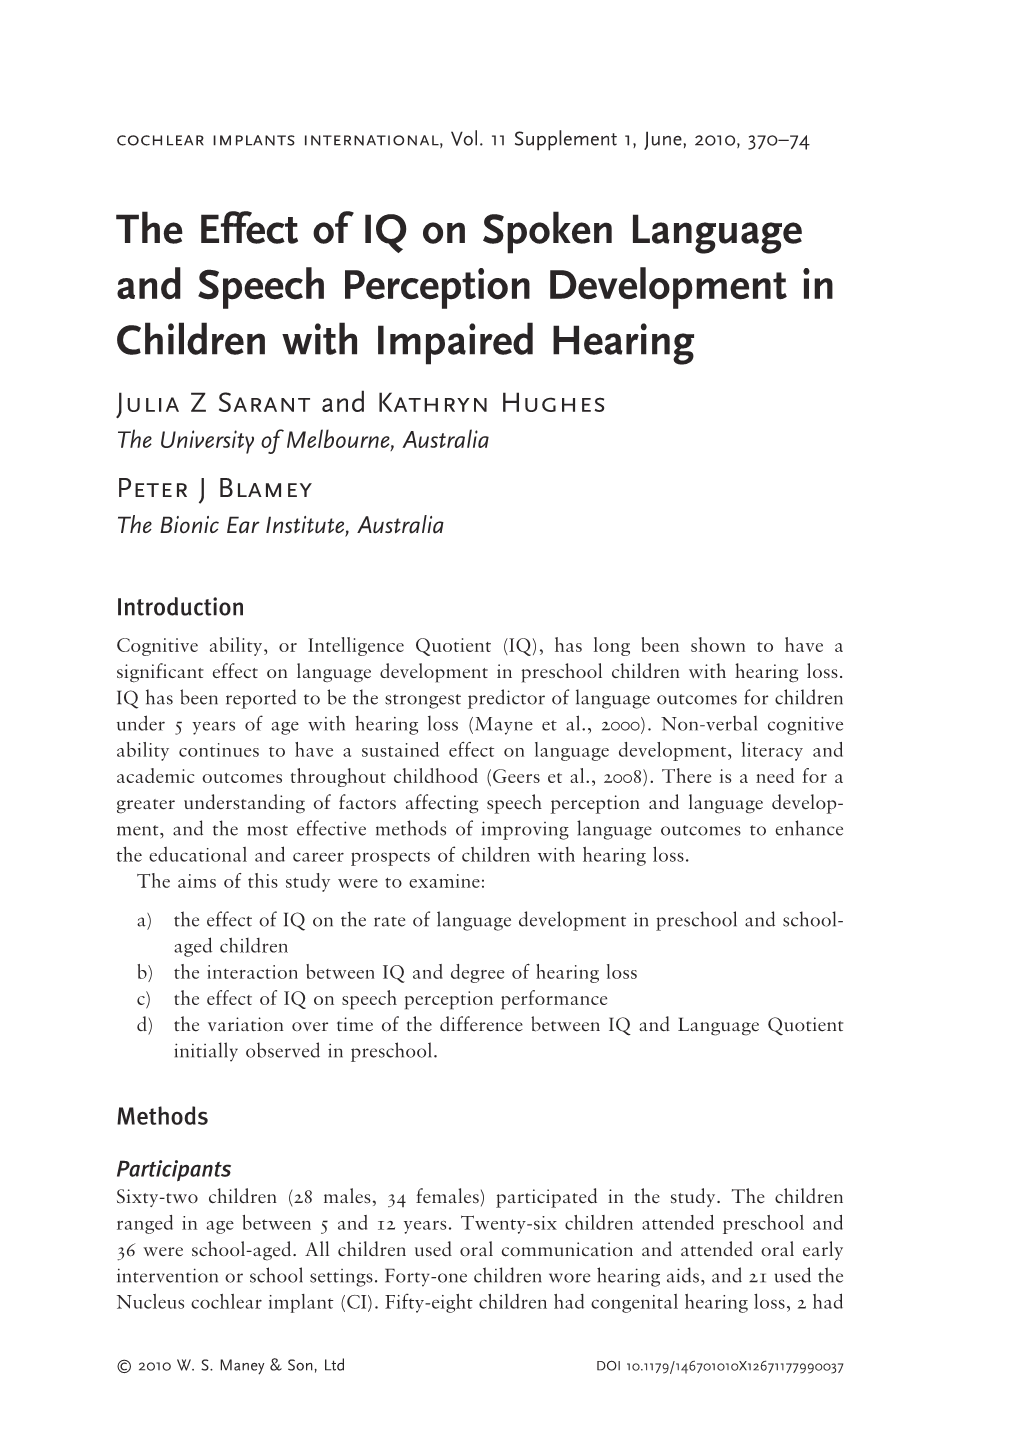 The Effect of IQ on Spoken Language and Speech Perception